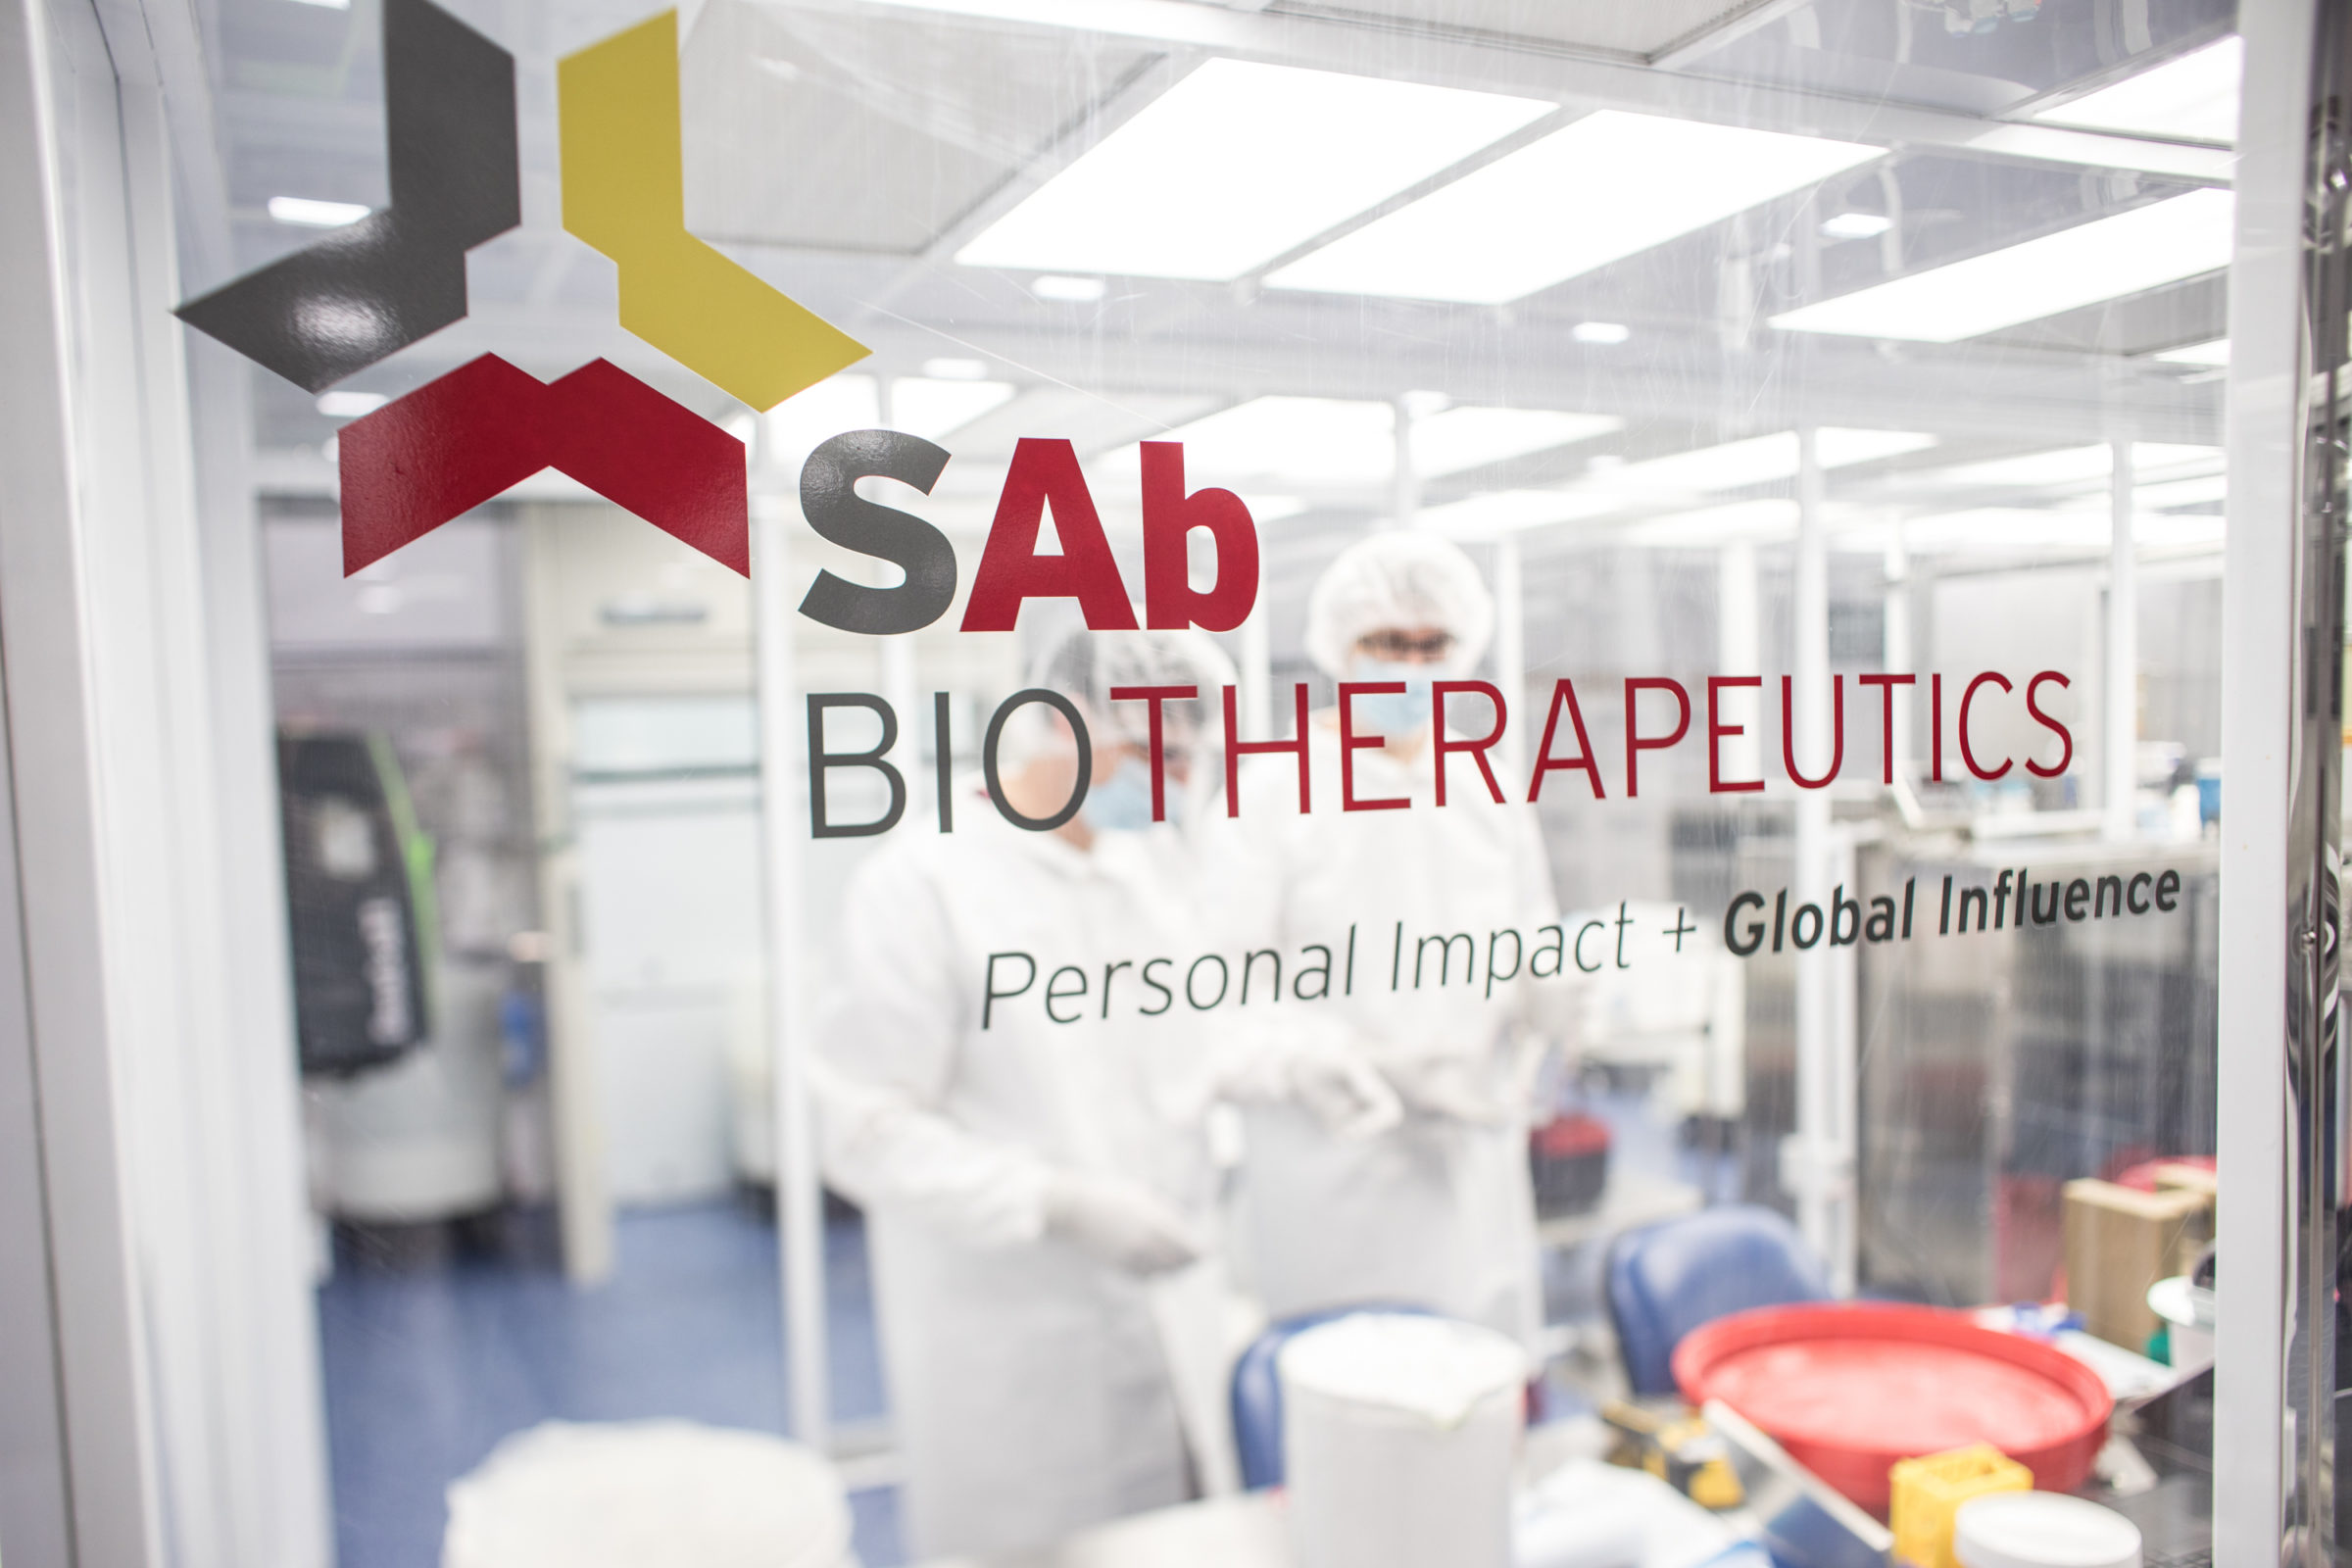 http://SAB%20Biotherapeutics%20Awarded%20$27M%20Contract%20%20to%20Develop%20Novel%20Rapid%20Response%20Capability%20for%20U.S.%20Department%20of%20Defense